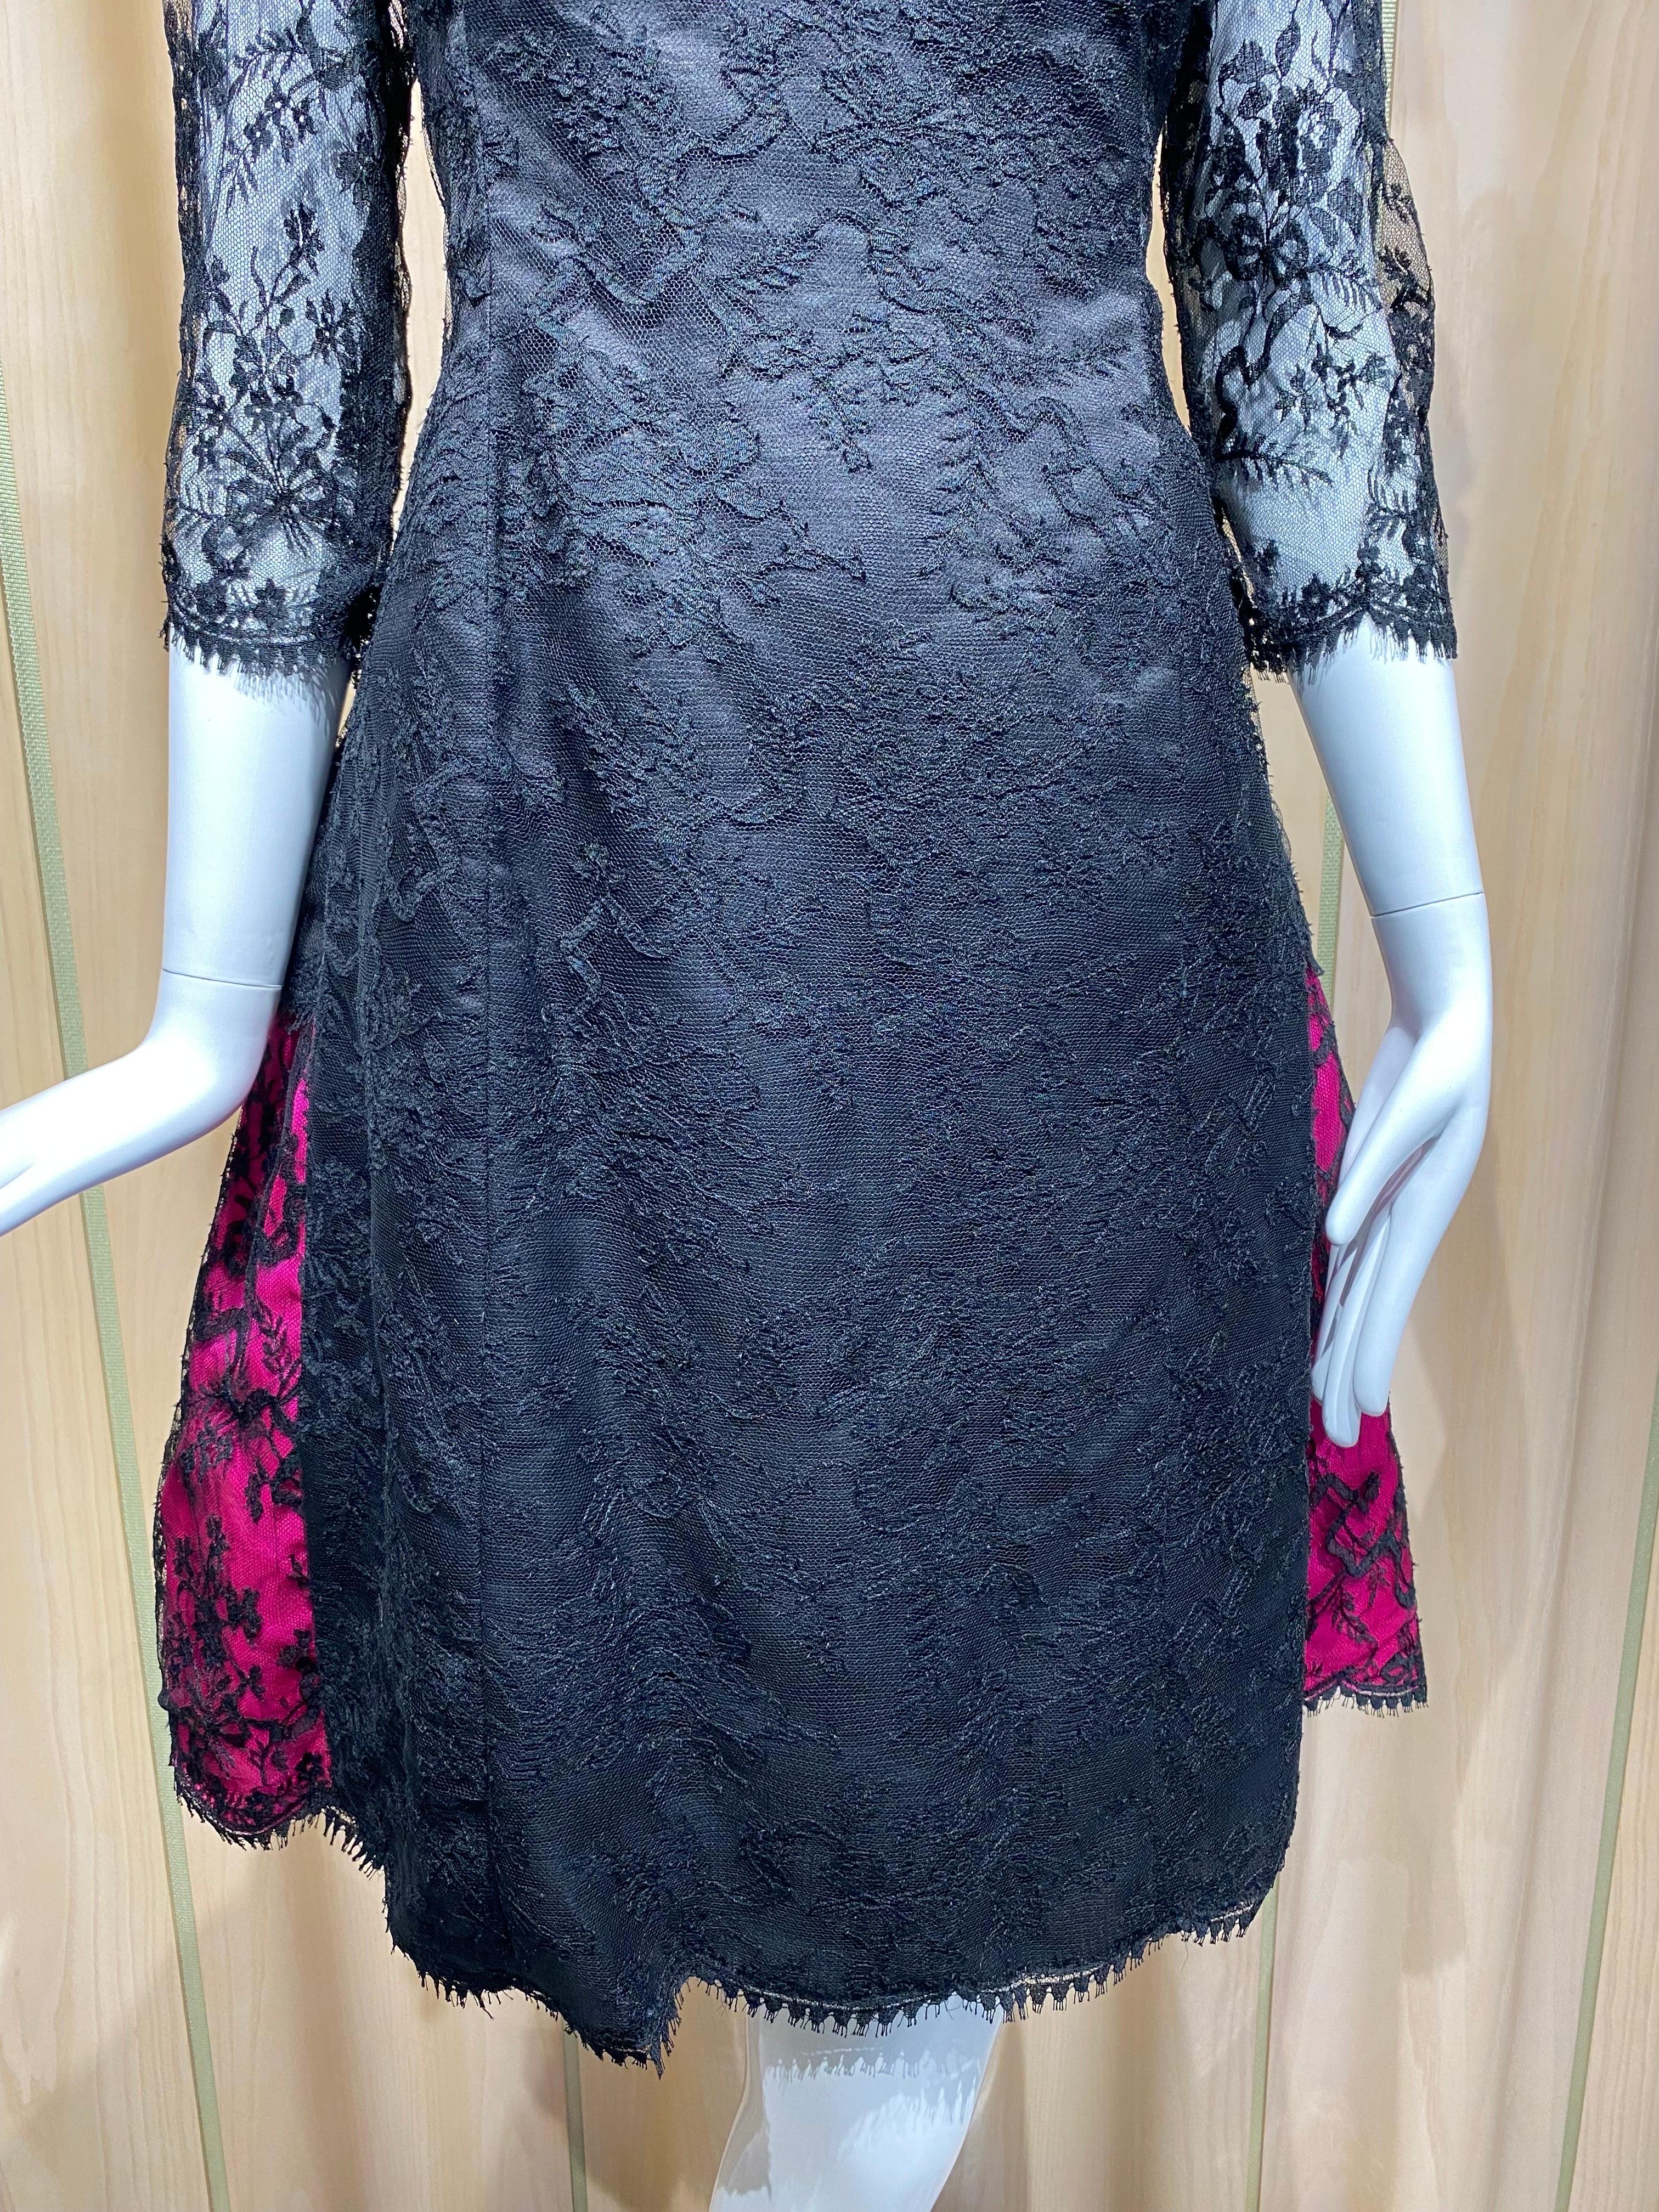 Vintage Bill Blass Black Lace and Hot Pink Cocktail Dress For Sale 4